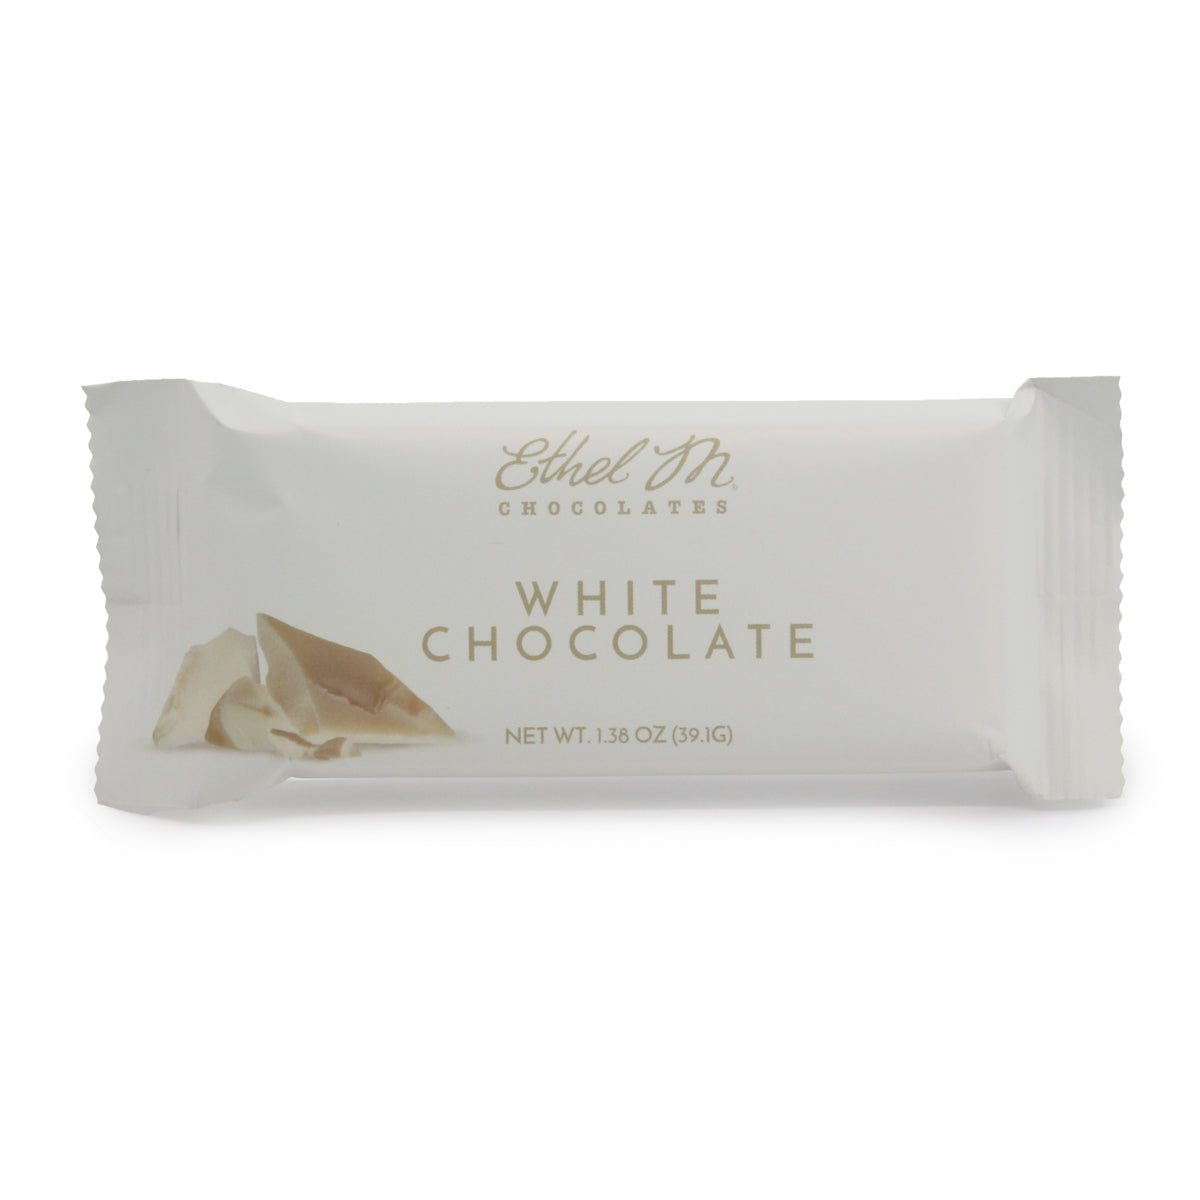 Sink your teeth into our very own Sweet with Richness of Cocoa Butter, Ethel M Chocolates White Chocolate Bar.